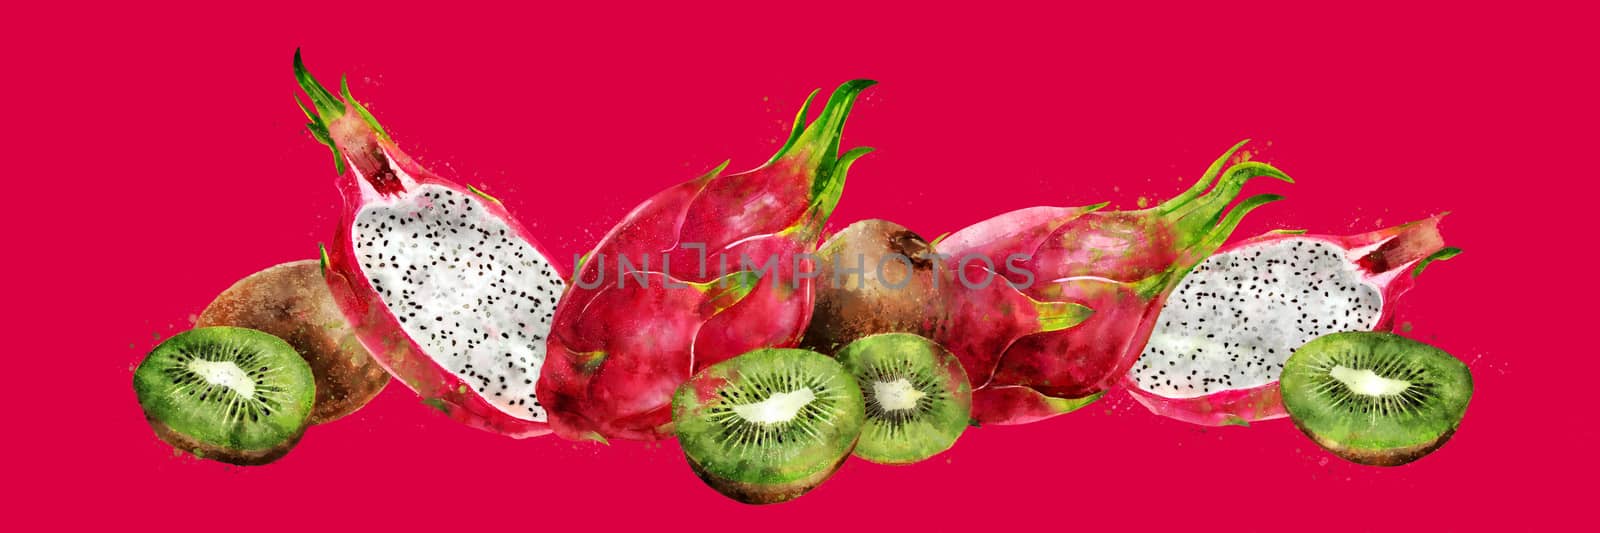 Dragon fruit and kiwi, hand-painted illustration on red background